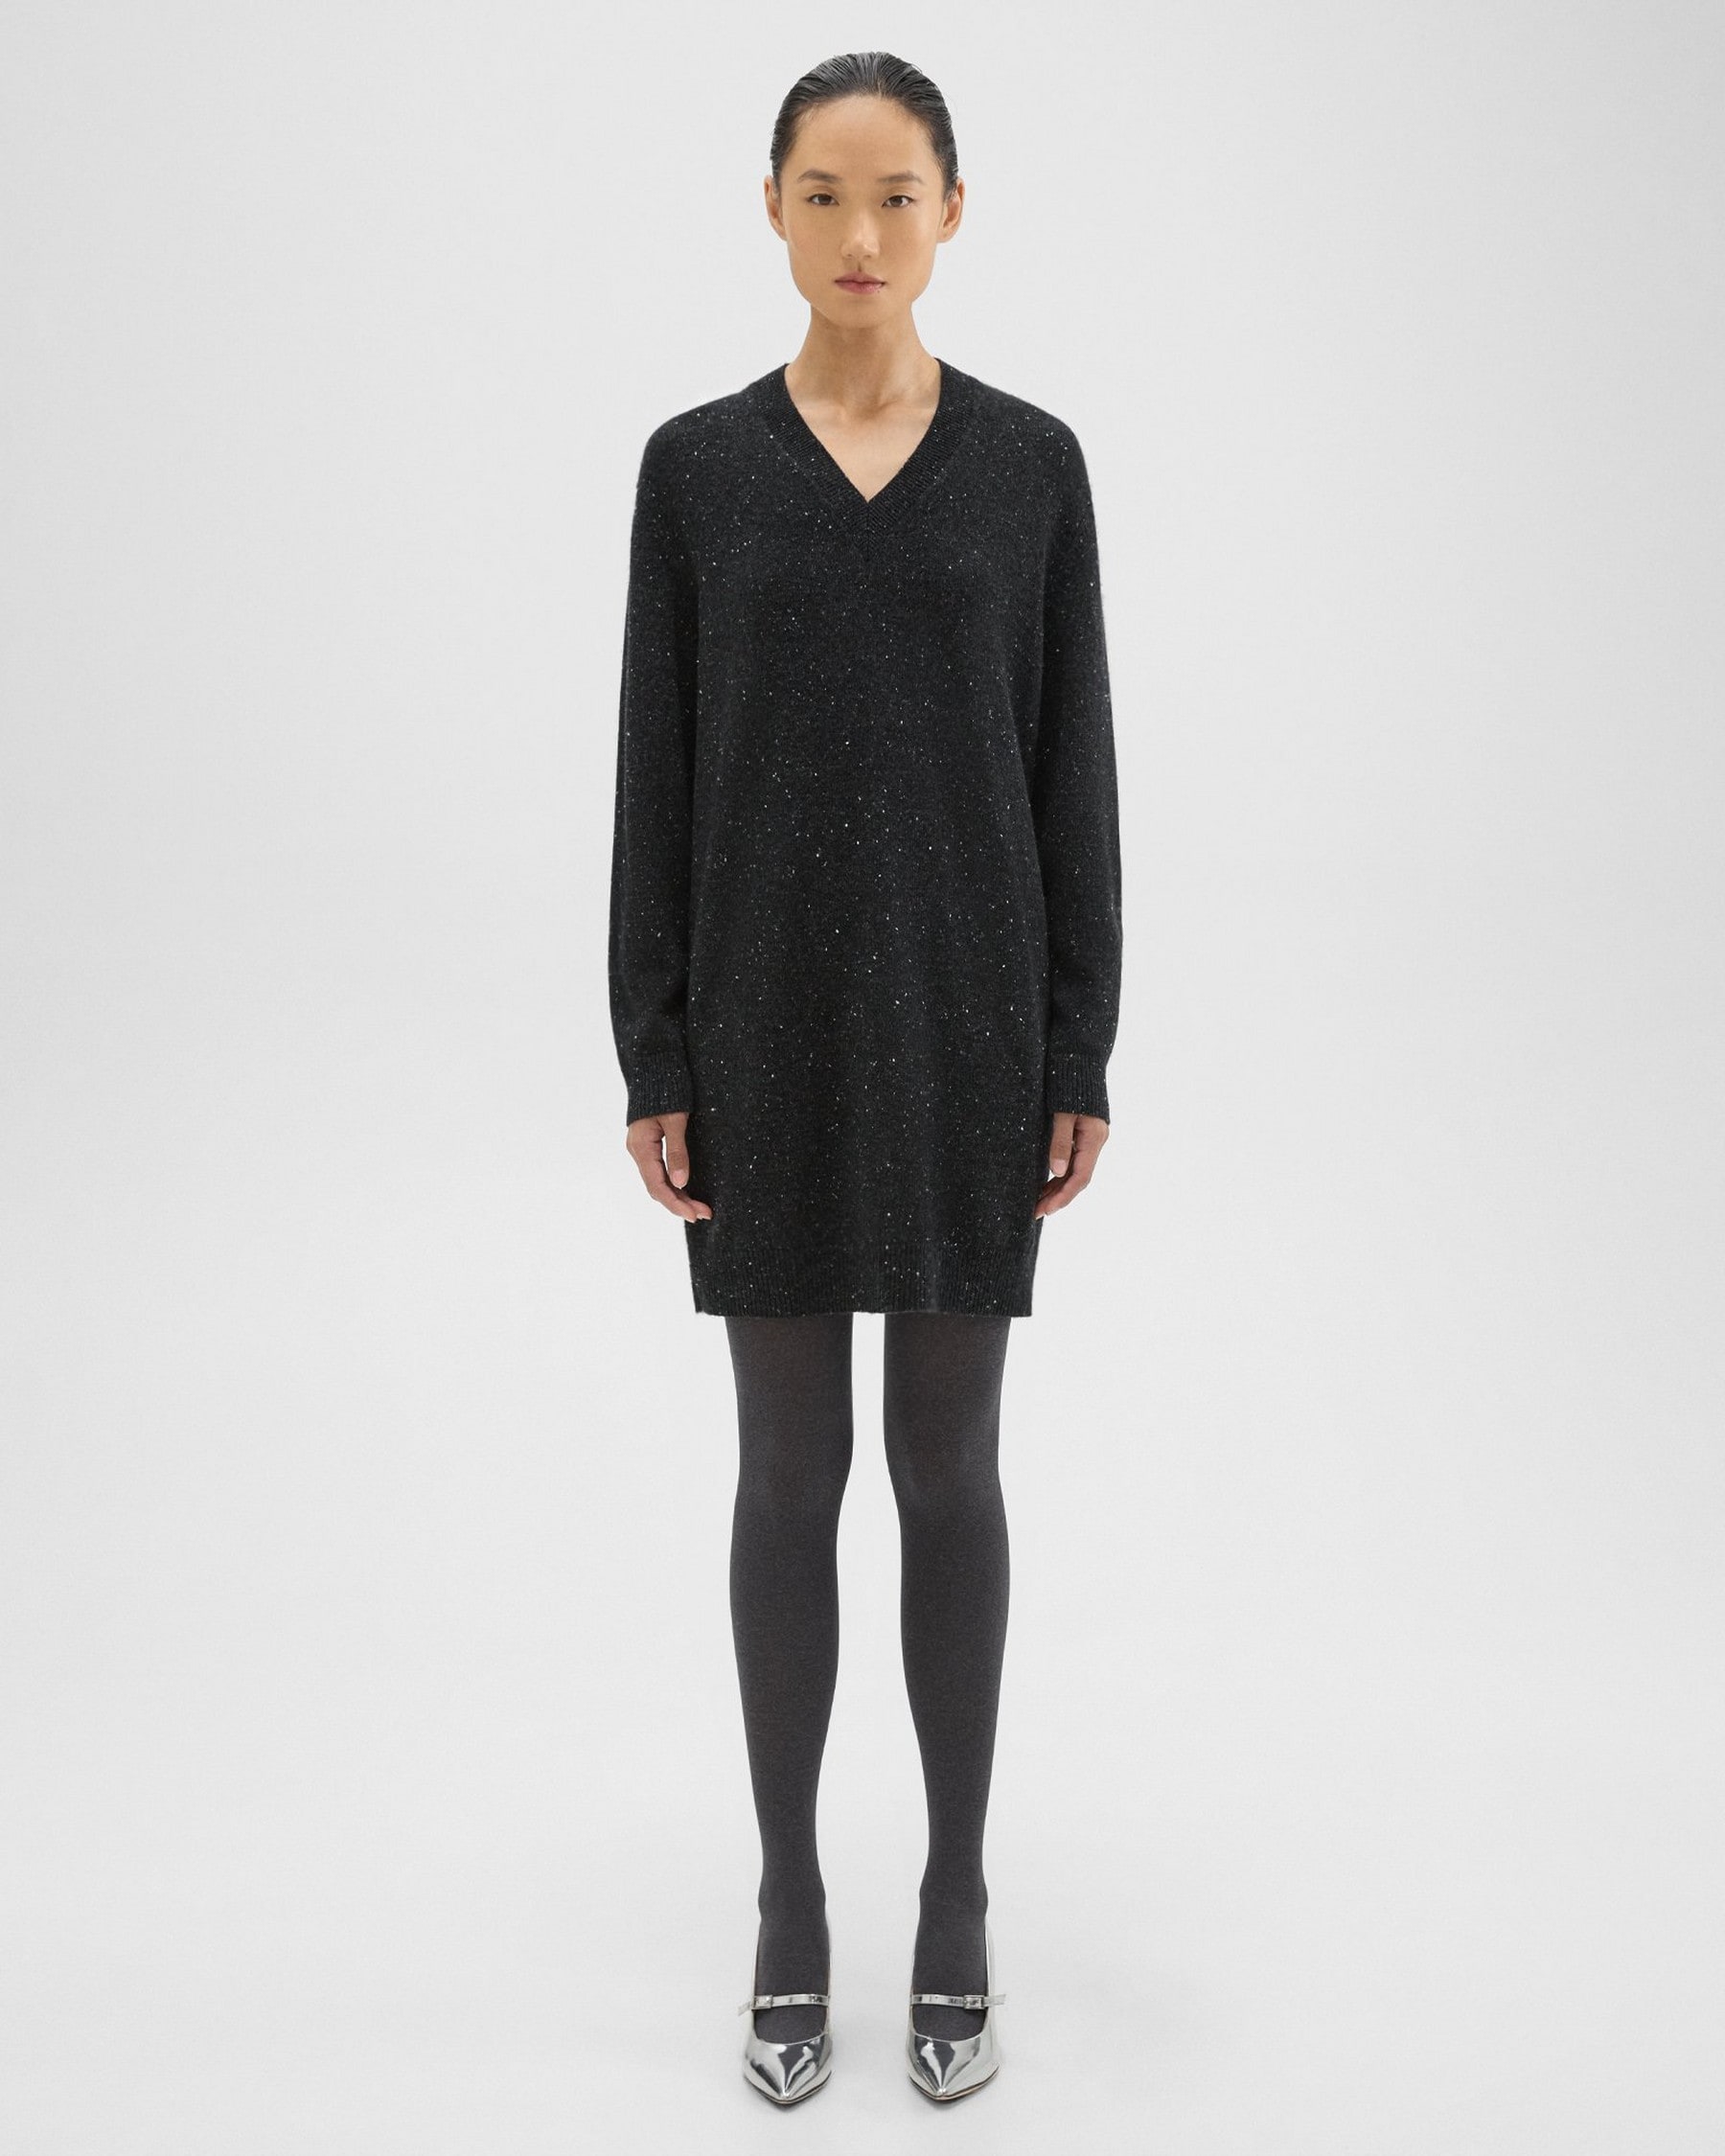 Theory V-Neck Sweater Dress in Donegal Wool-Cashmere